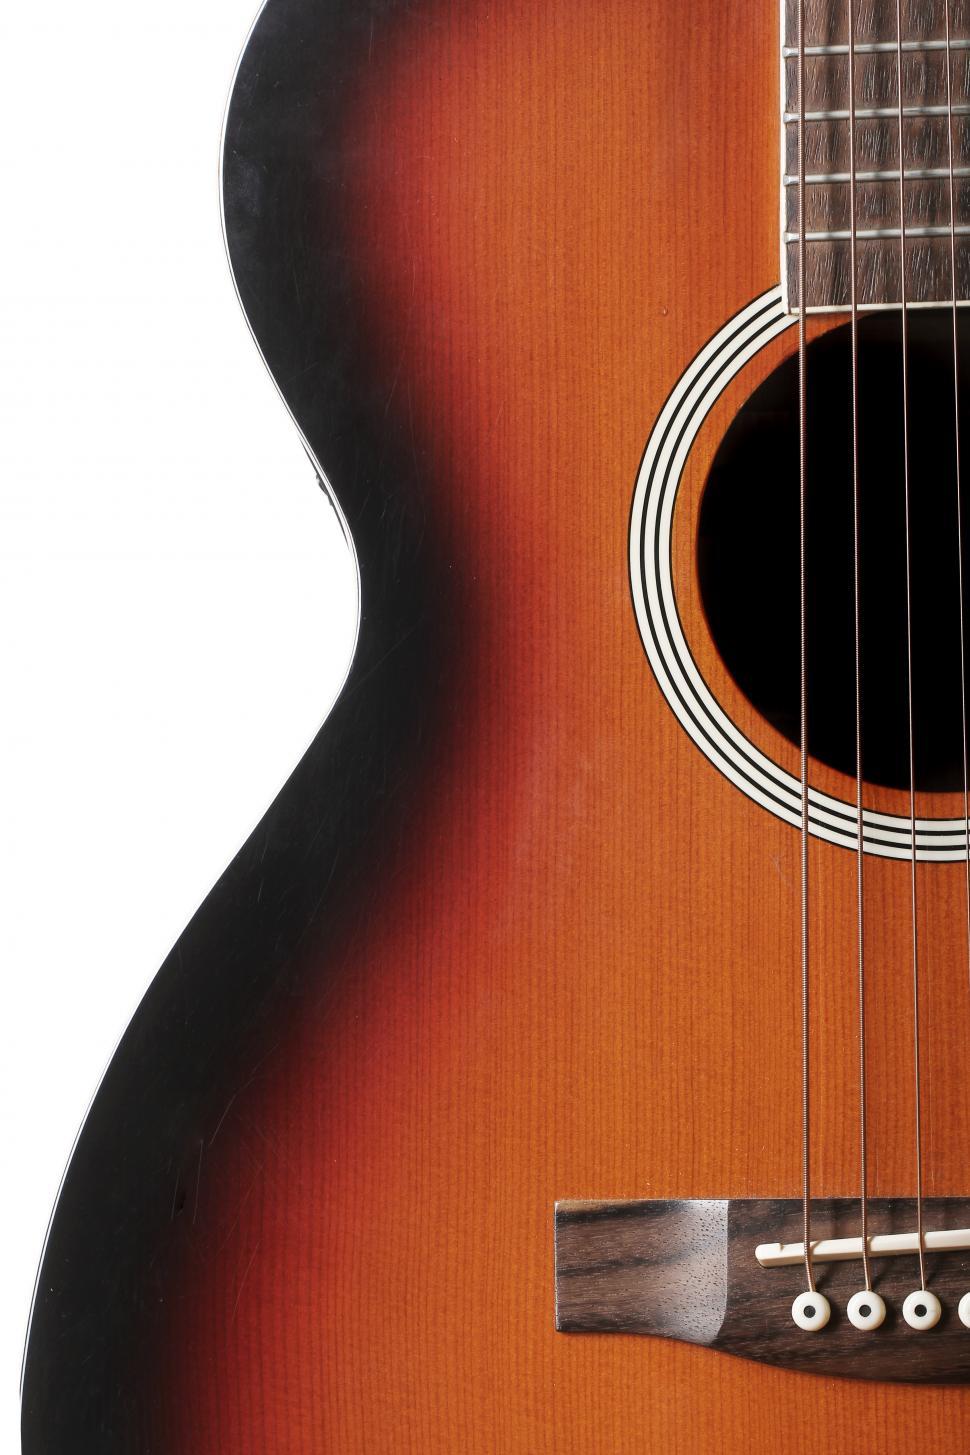 Free Image of Classic acoustic guitar shape and strings close up 